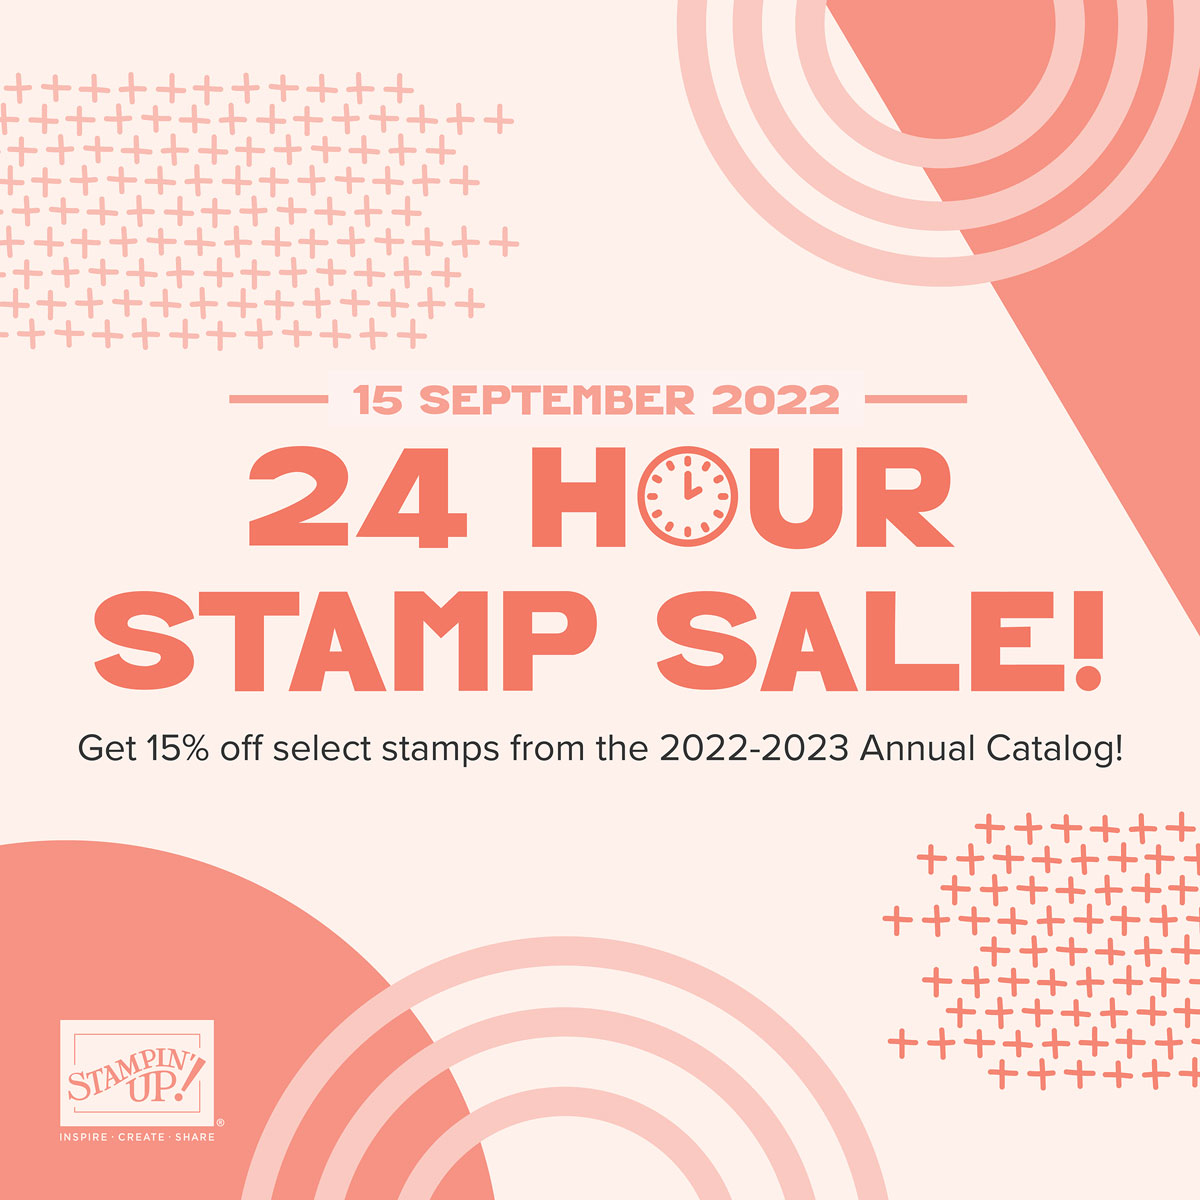 24 Hour Stamp Sale - 15 September 2022 | Join Stampin’ Up! | Frequently Asked Questions about becoming a Stampin’ Up! Demonstrator | Join the Craft Stampin’ Crew | Stampin Up Demonstrator Linda Cullen | Crafty Stampin’ | Purchase Stampin’ Up! Product | FAQ about Paper Pumpkin |